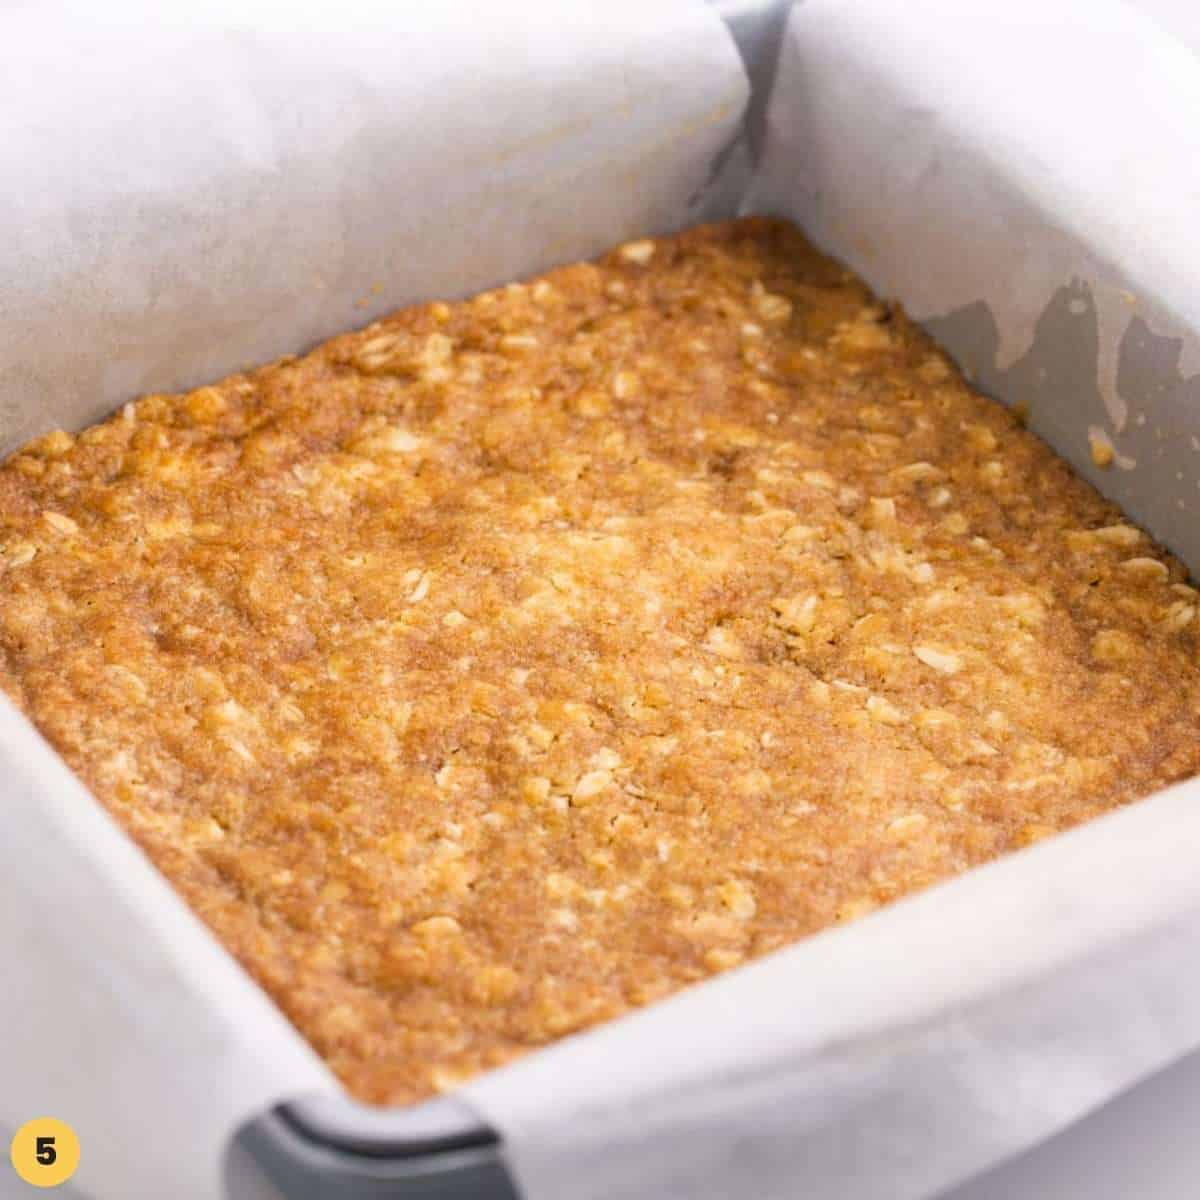 baked carmelitas oatmeal bars before the caramel and chocolate are added.